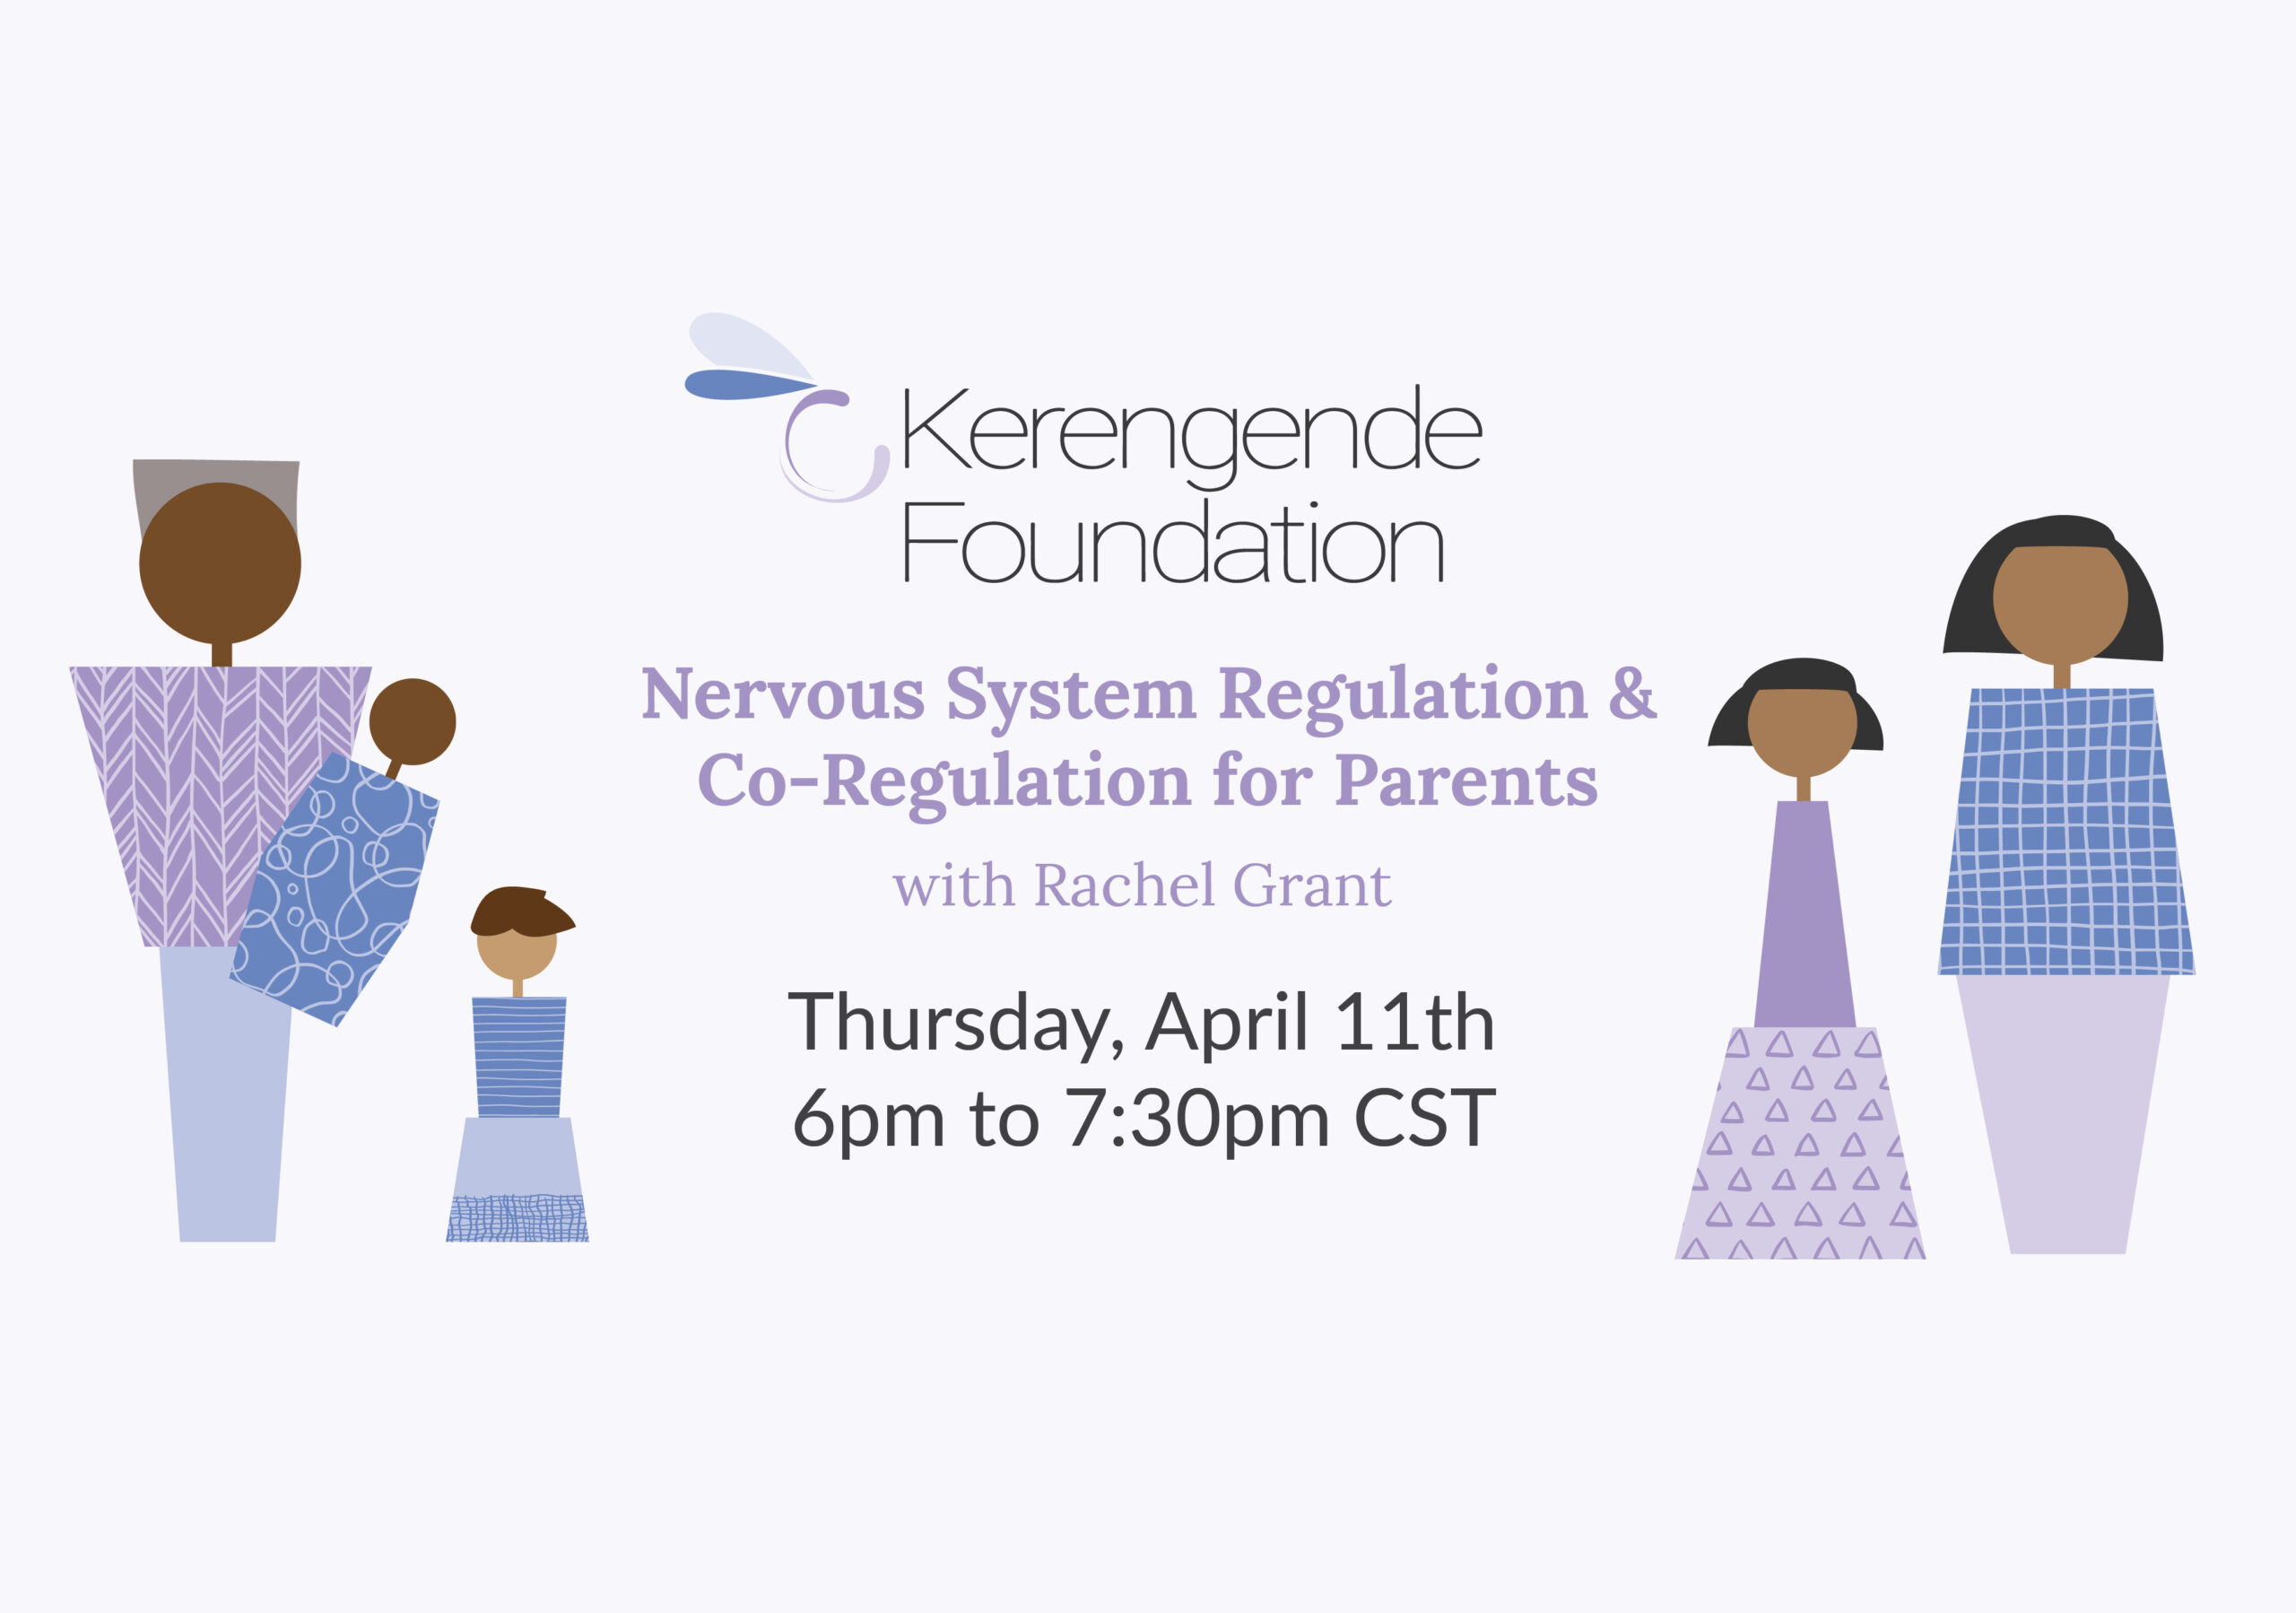 nervous system regulation and co-regulation for parents with rachel grant, thursday, april 11th, 5:30pm to 7:30pm CST